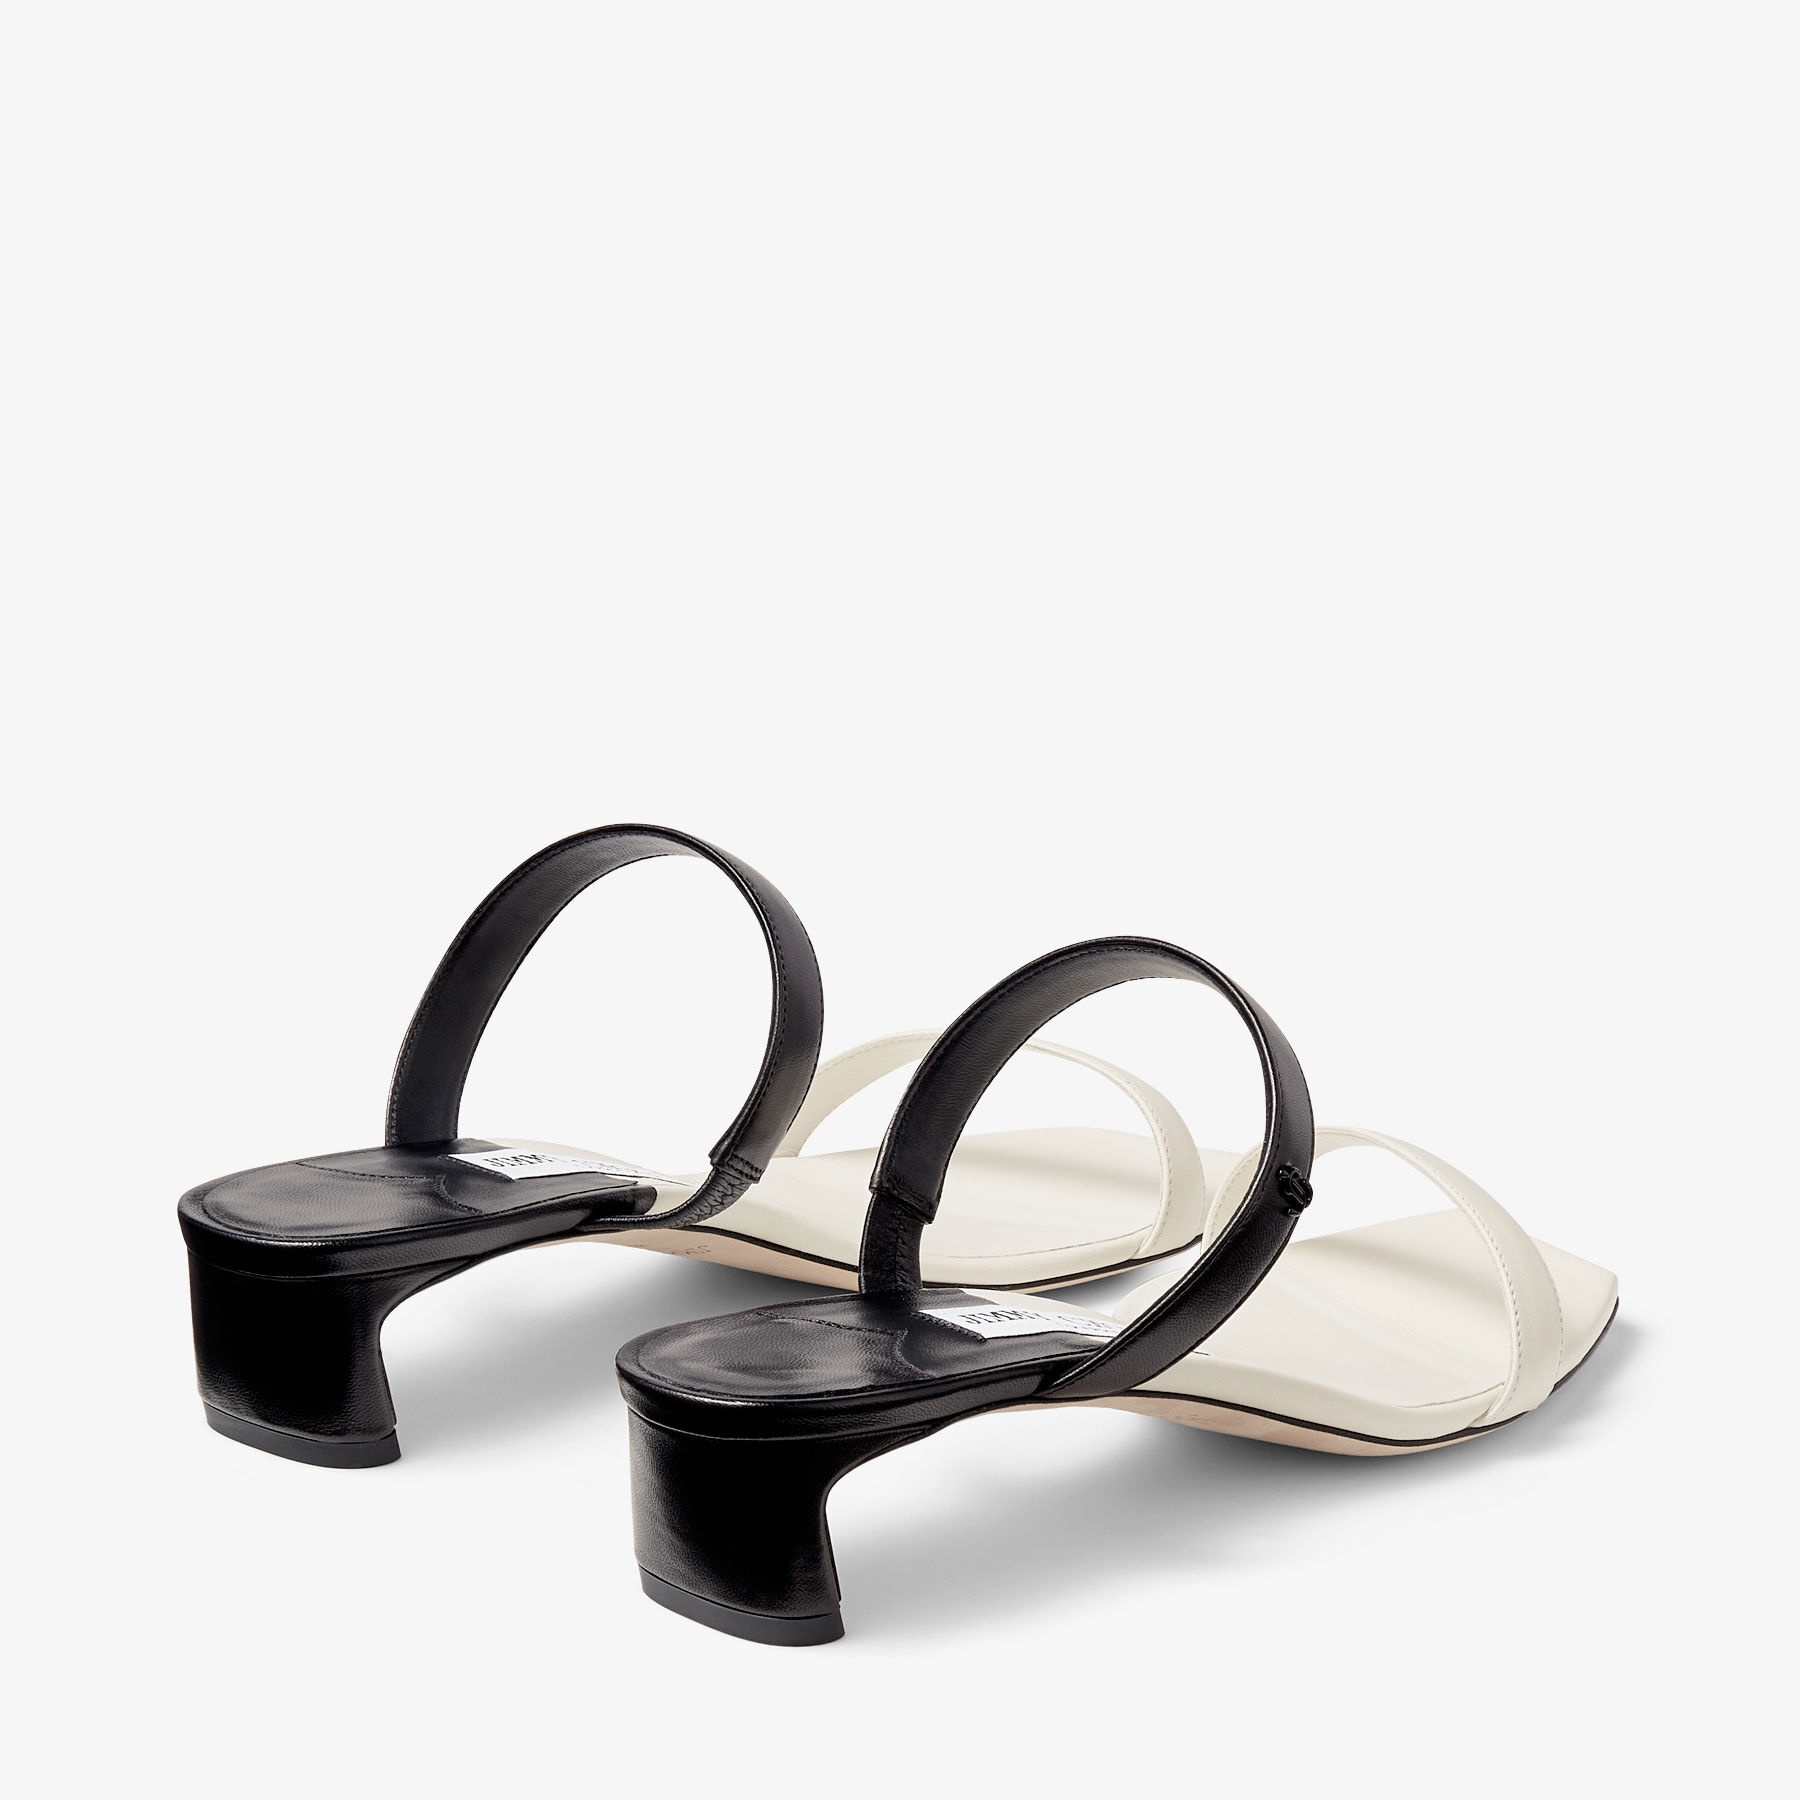 Kyda 35
Black and Latte Nappa Leather Sandals - 5